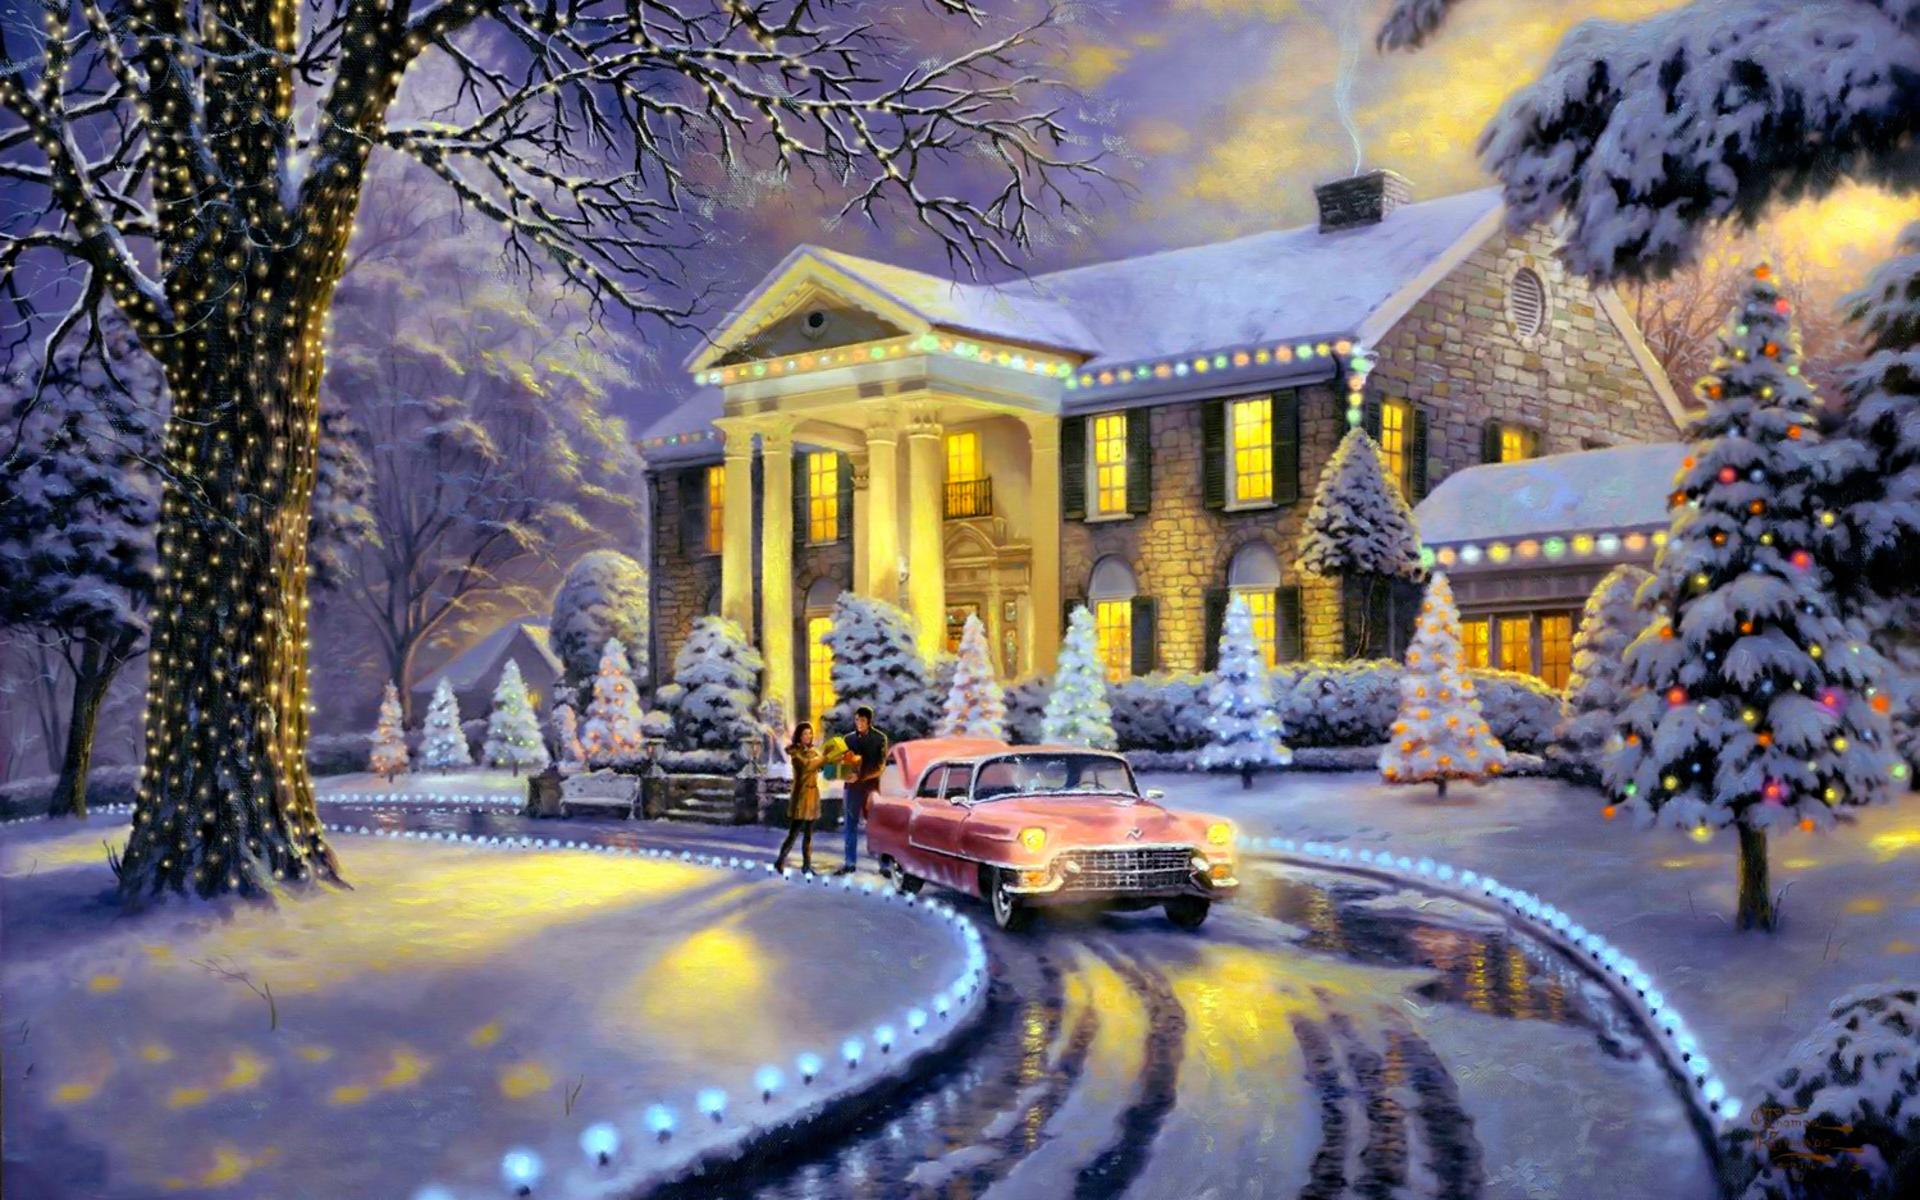 Home For Christmas HD Wallpaper, get it now